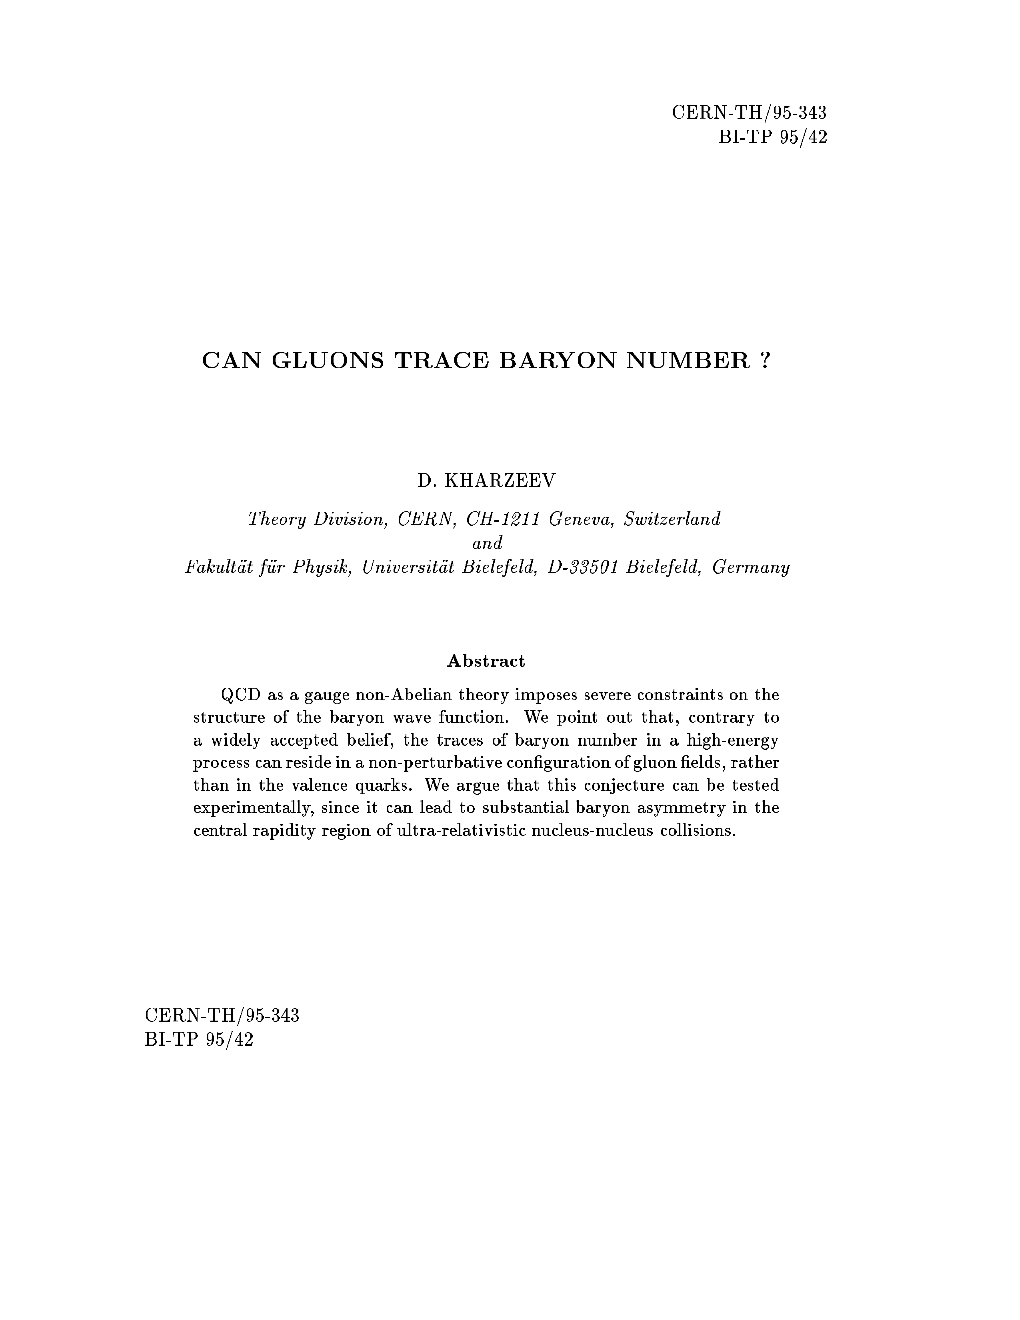 Can Gluons Trace Baryon Number ?